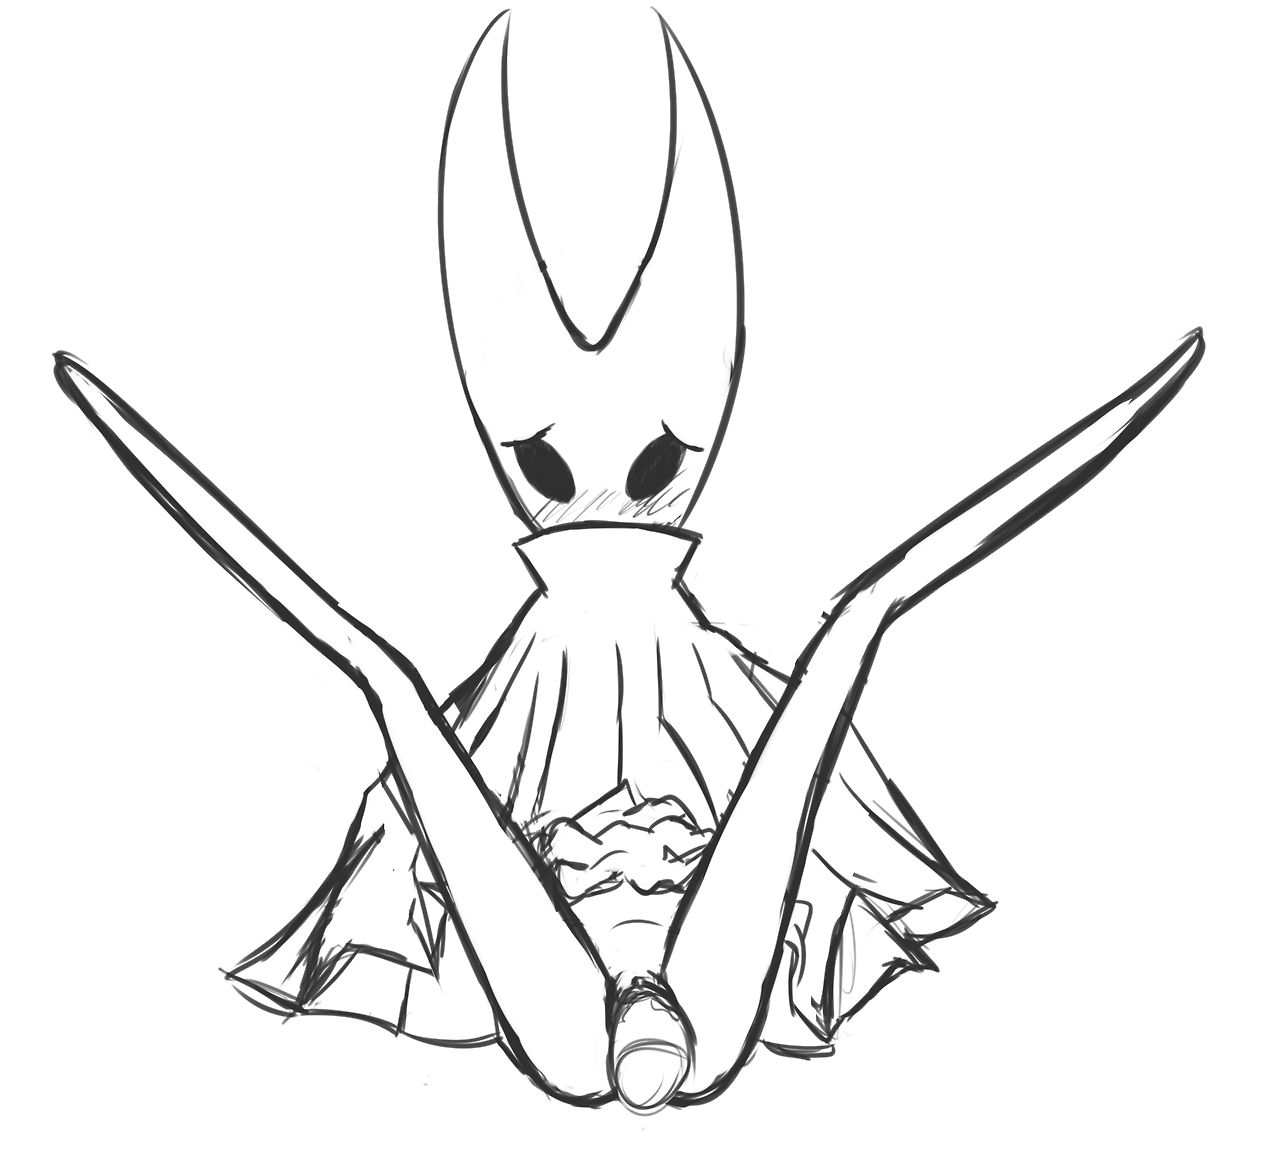 Hollow knight collection 58